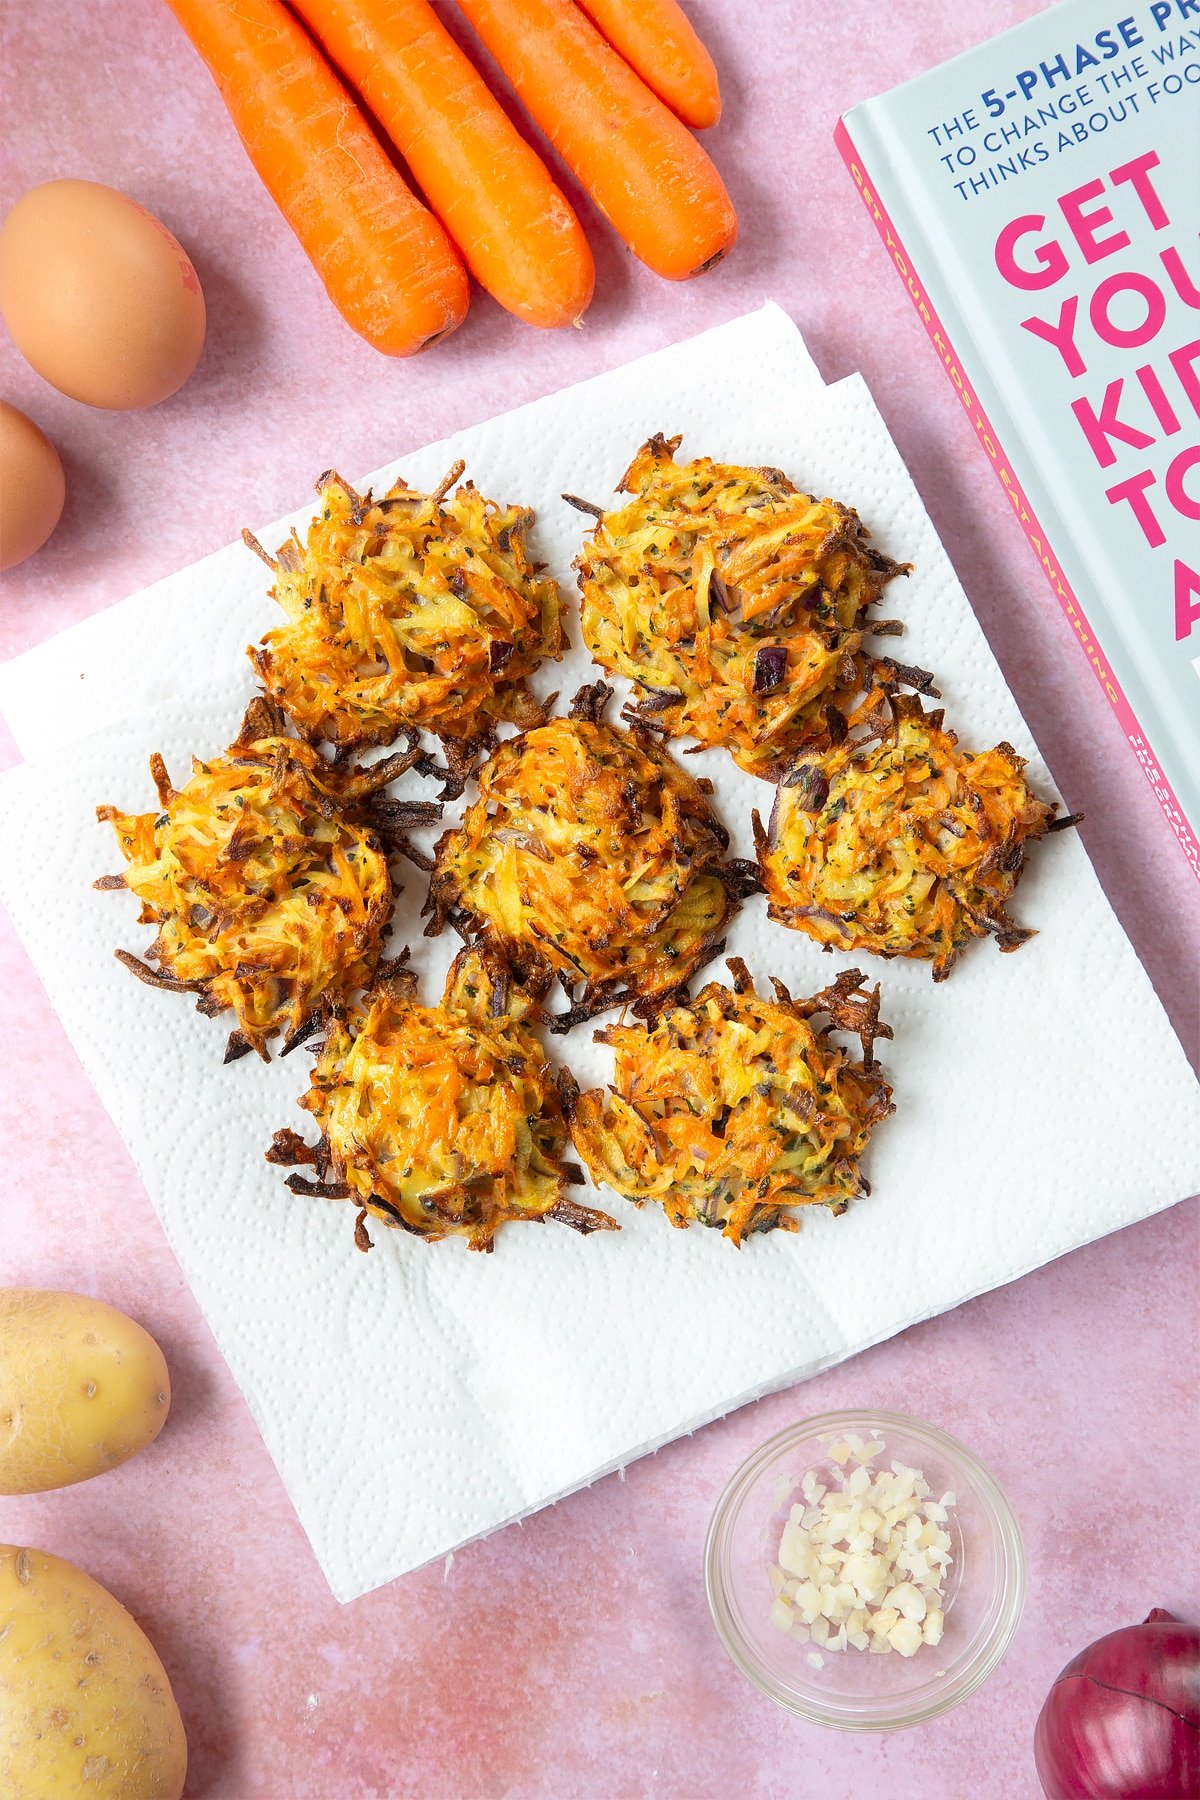 Seven cooked carrot patties on a plate lined with kitchen paper. The plate is surrounded by ingredients to make carrot patties.